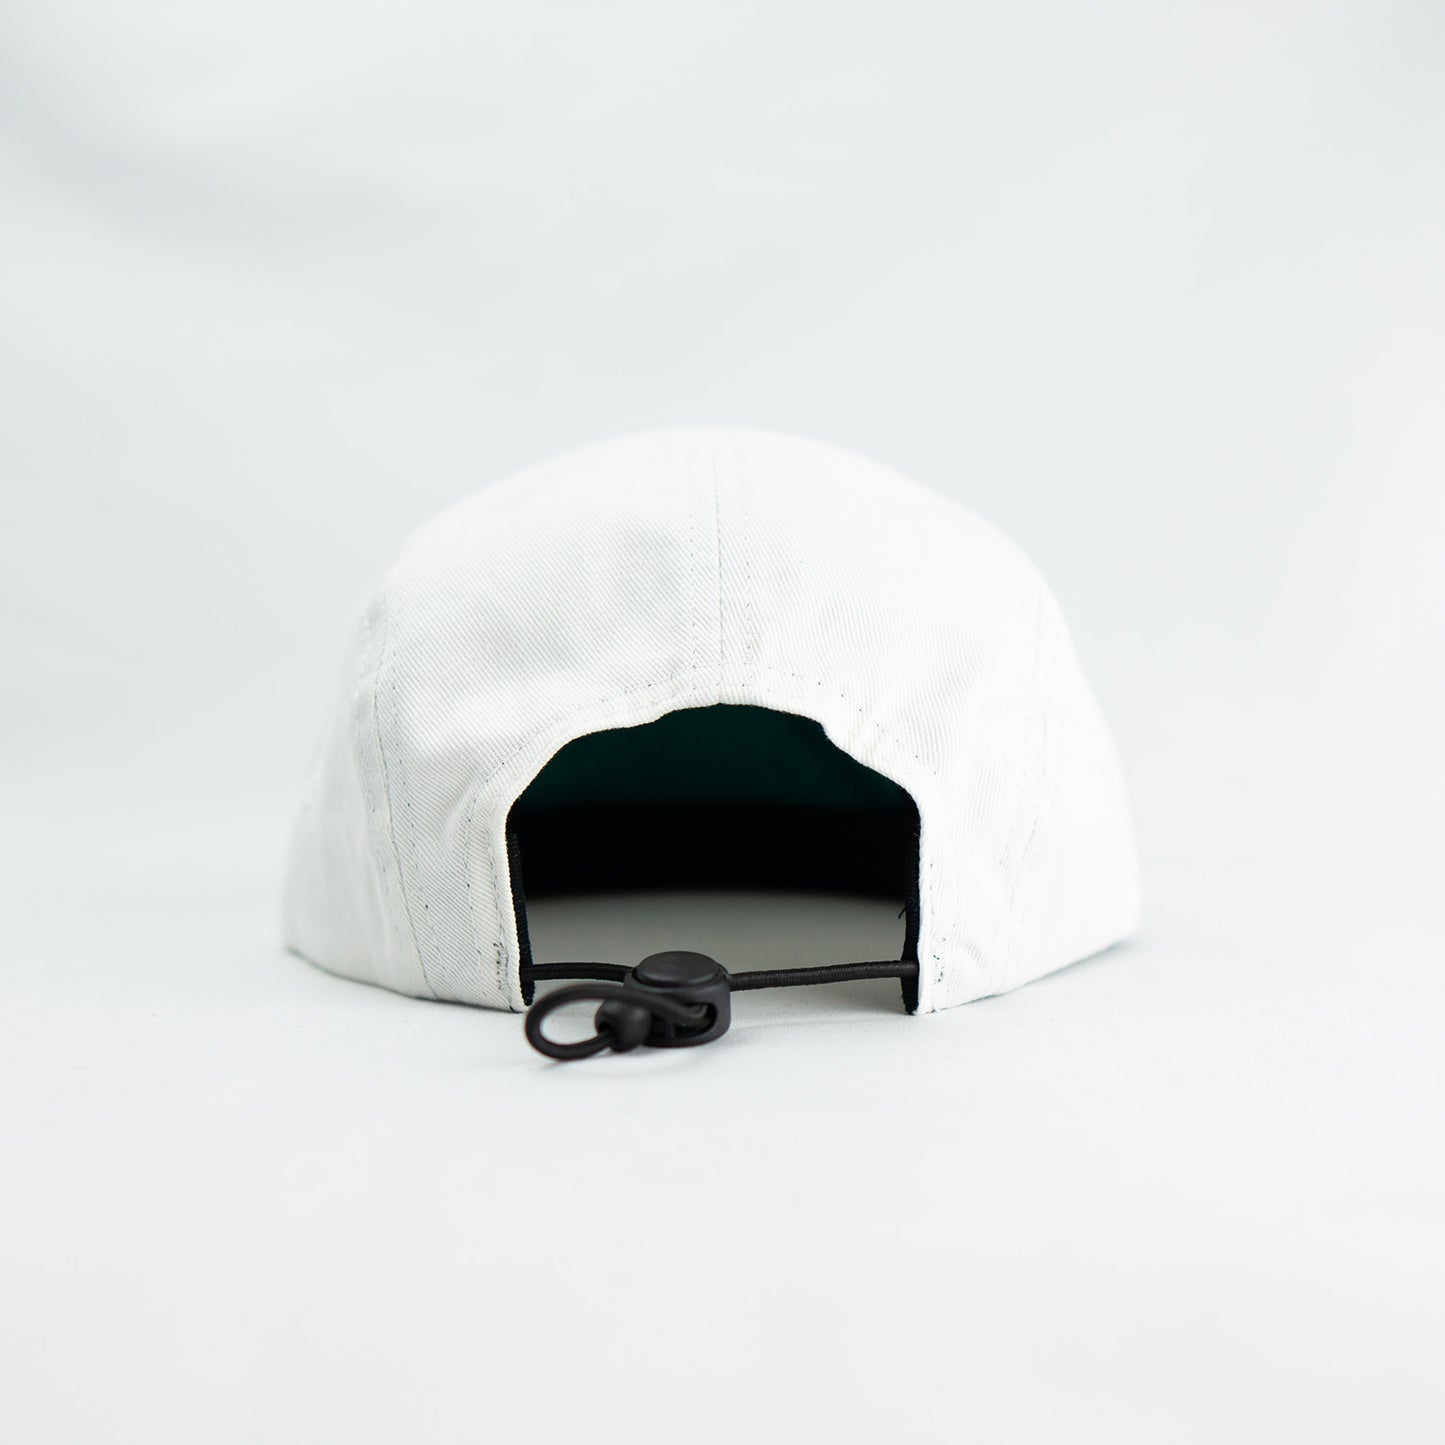 klatch co linden 5 panel cap in white and green back toggle fastener